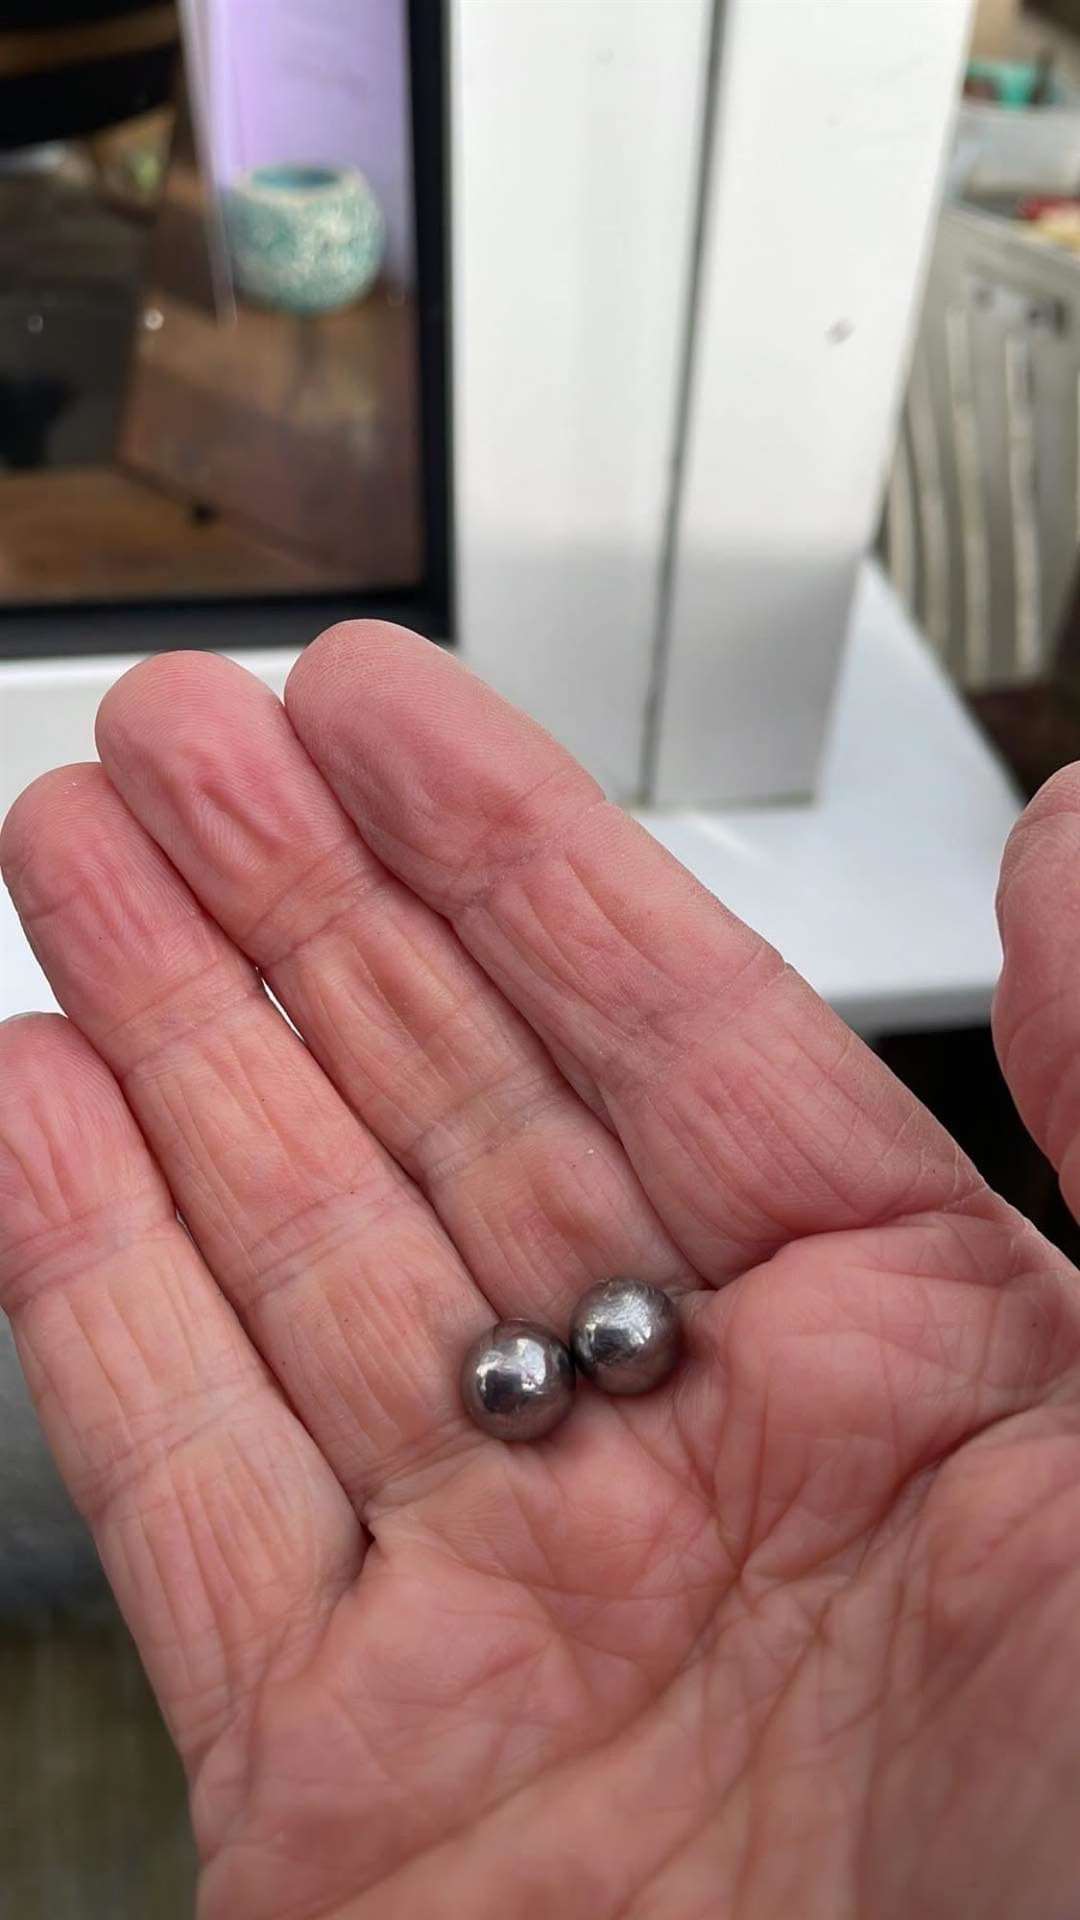 Recovered ball bearings used by the louts to smash the glass. Picture: Lydden Village Community Group